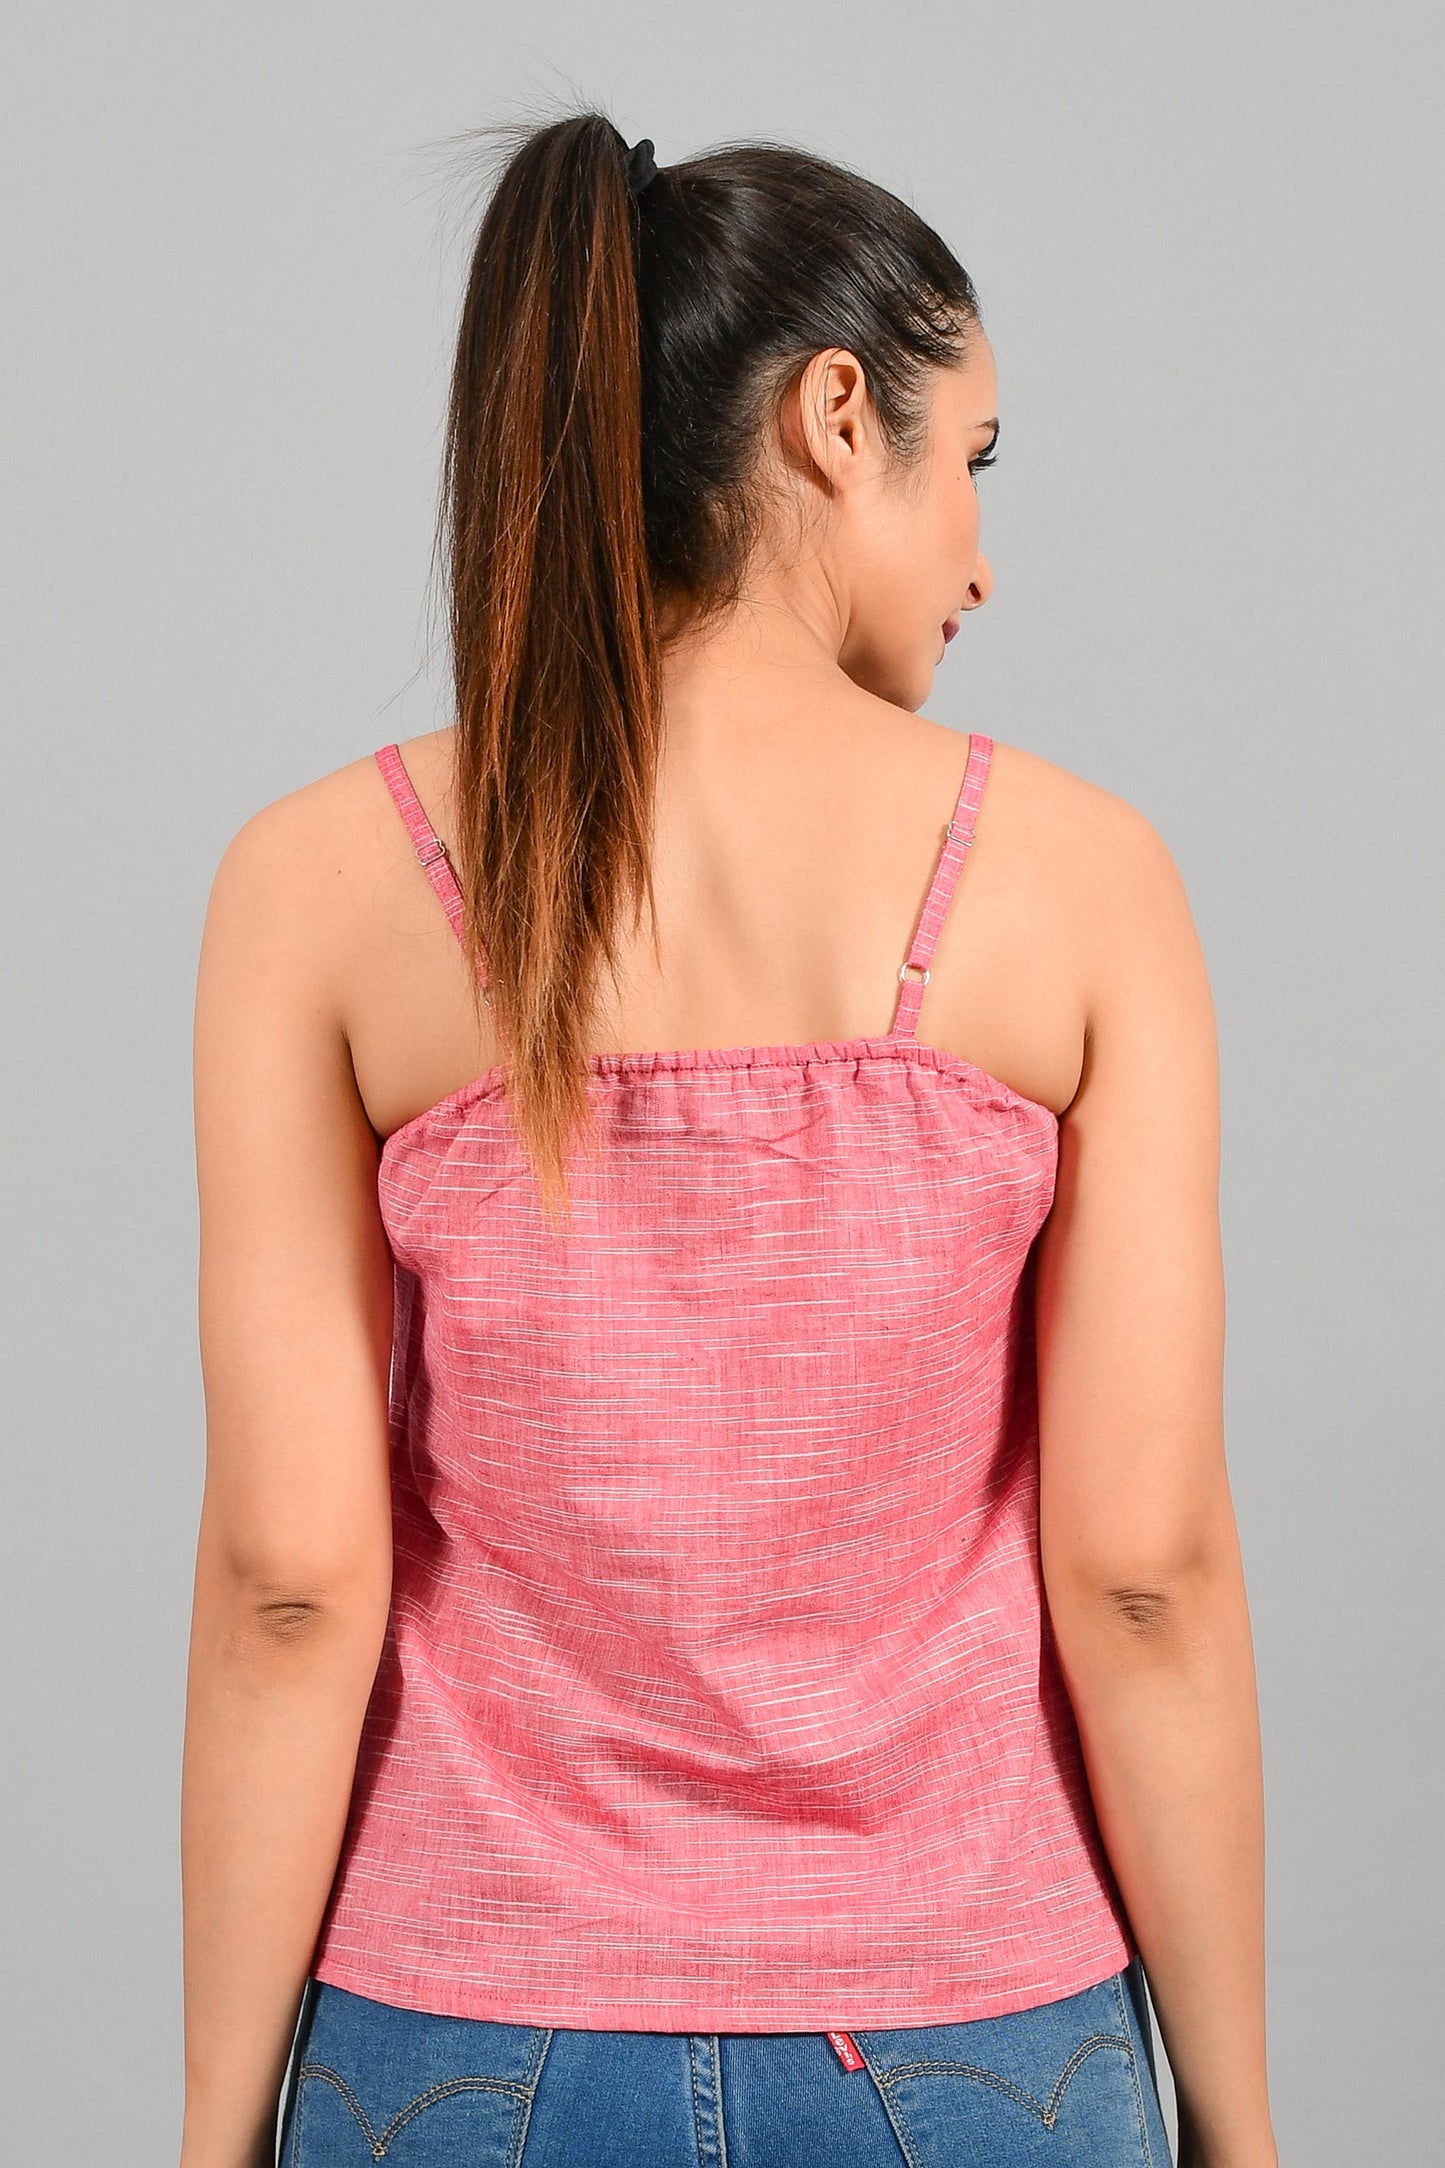 Back pose of an Indian female womenswear fashion model in a space dyed red spaghetti made with handspun and handwoven khadi cotton by Cotton Rack.